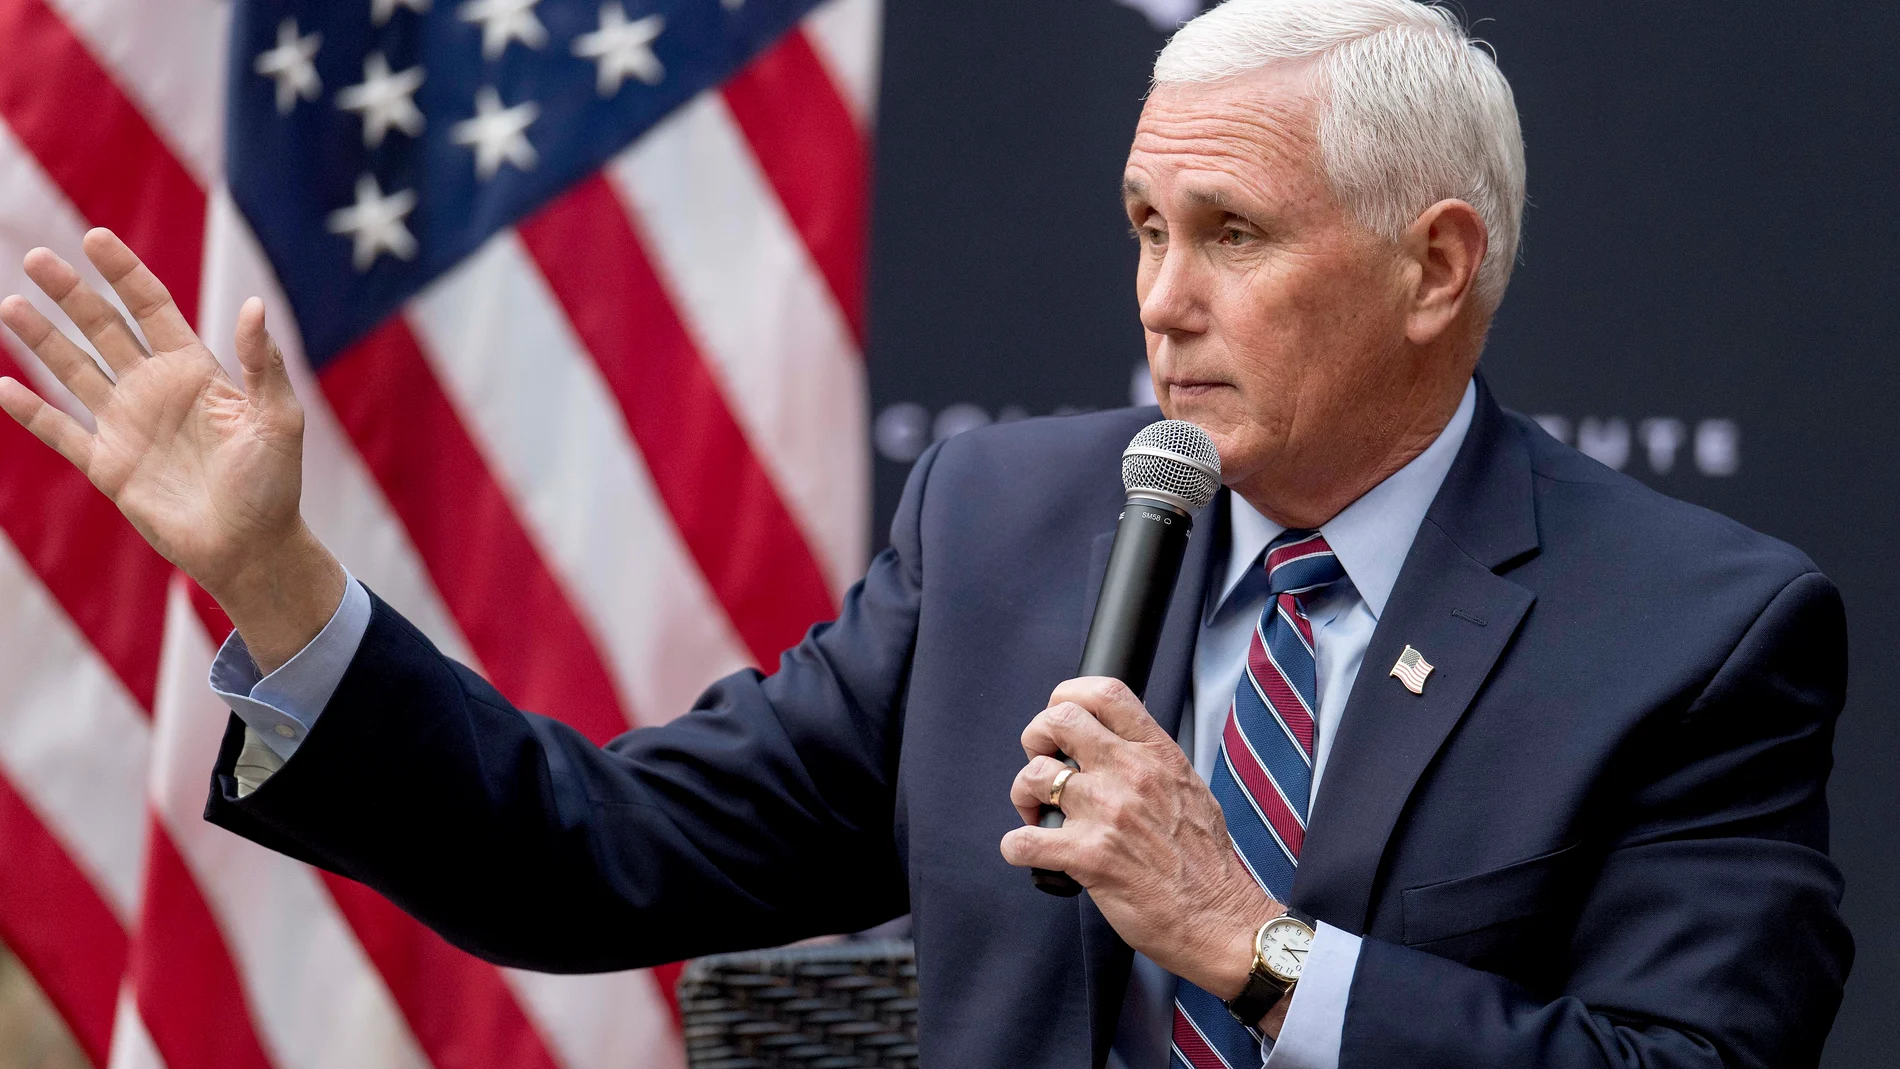 April 18, 2023 - Anaheim Hills, California, USA - Former Vice President MIKE PENCE speaks to college conservatives at an event organized by the Lincoln Institute. (Foto de ARCHIVO) 18/04/2023